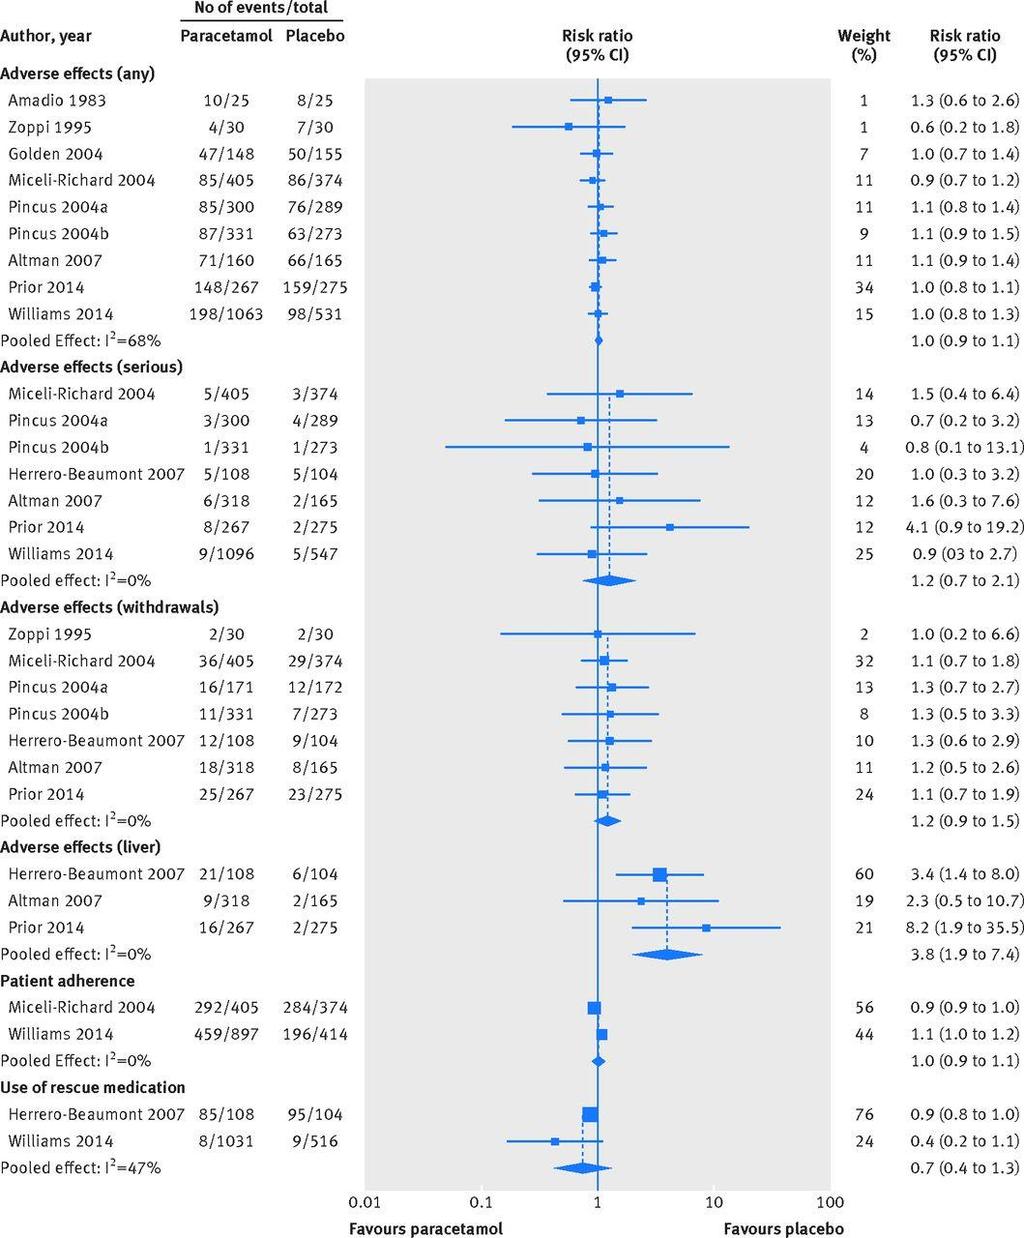 Fig 4 Risk ratio for safety outcome measures, patient adherence, and use of rescue medication in placebo controlled trials on efficacy